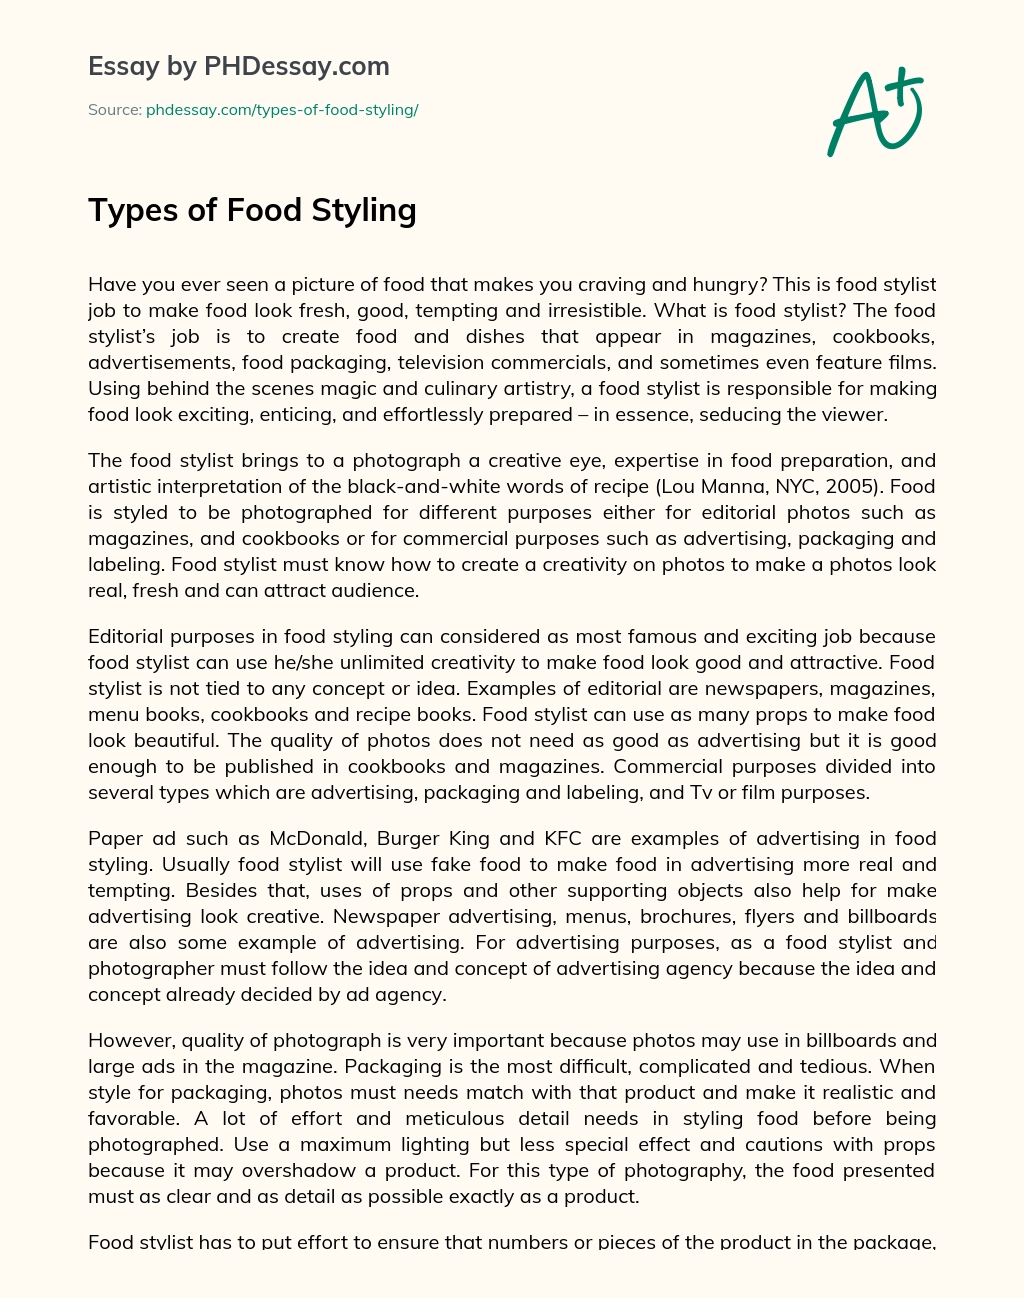 Types of Food Styling essay